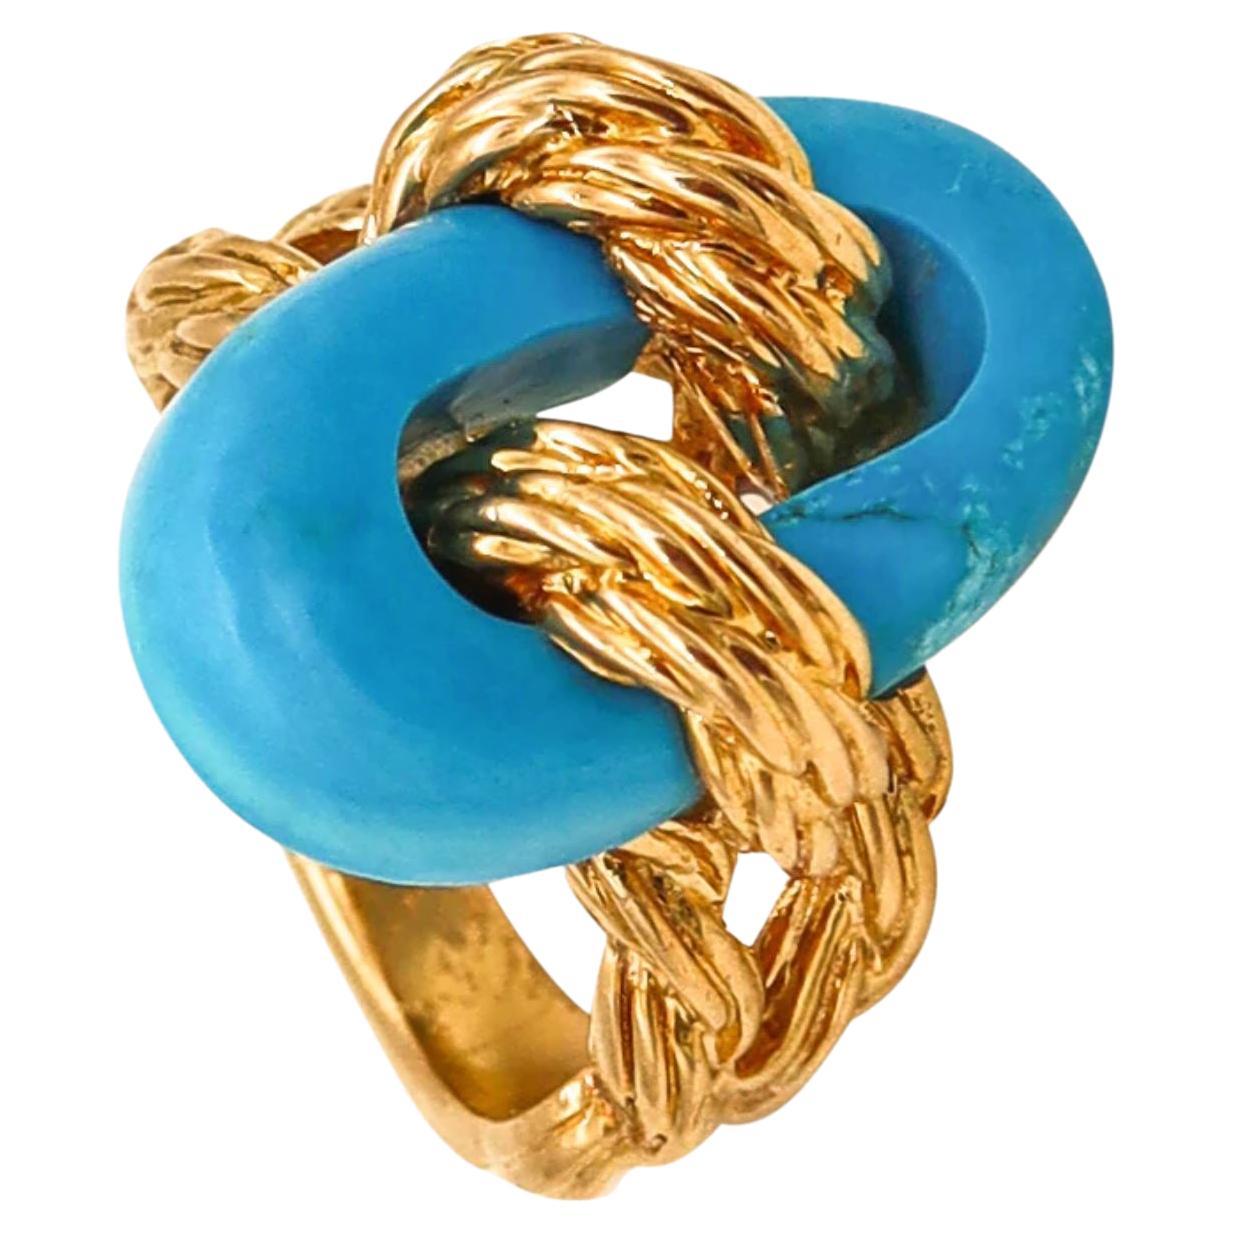 Van Cleef & Arpels 1970 Paris Twisted Ropes Cocktail Ring 18kt Gold Turquoise